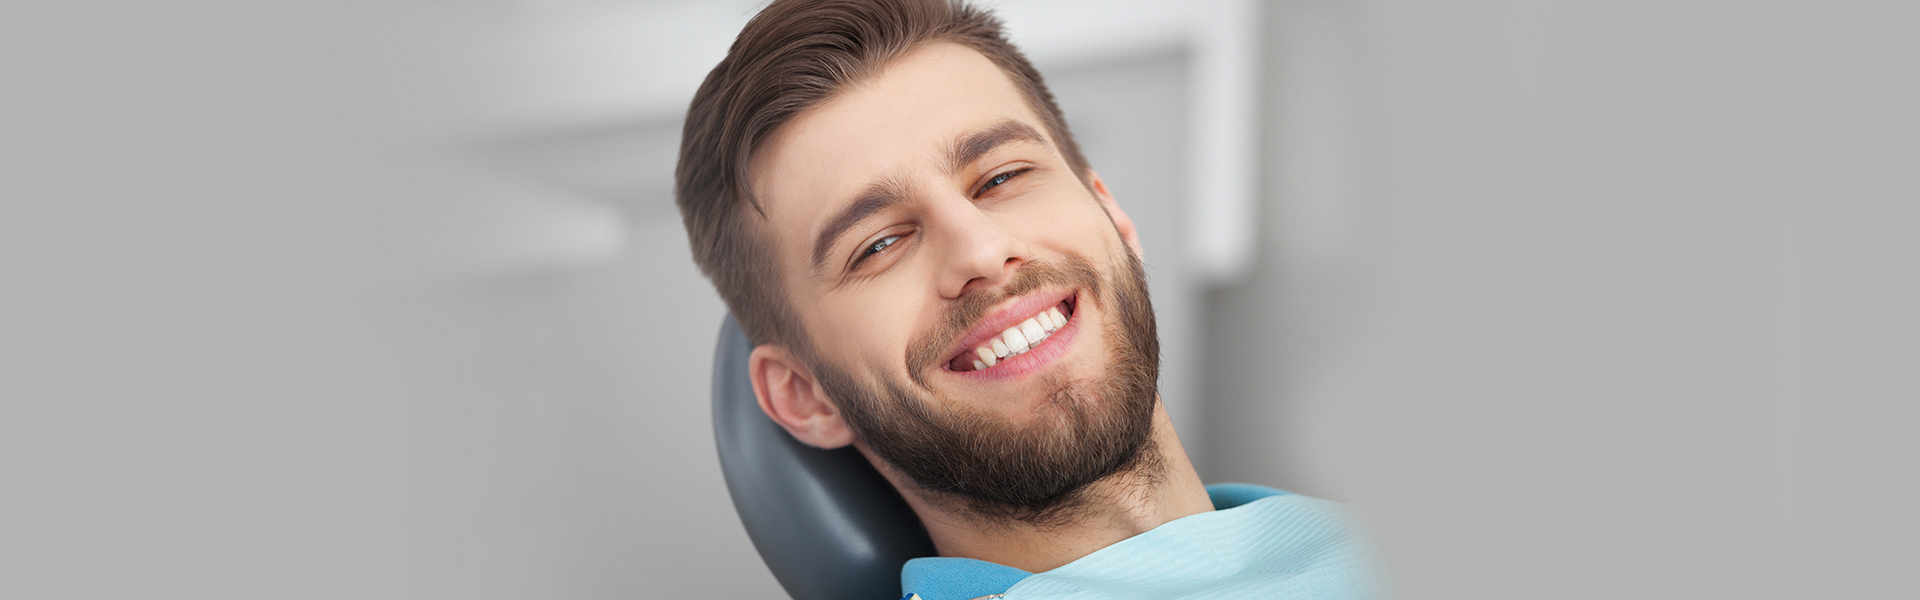 Restorative Dentistry: When Is It Necessary and What are Some of Its Benefits?